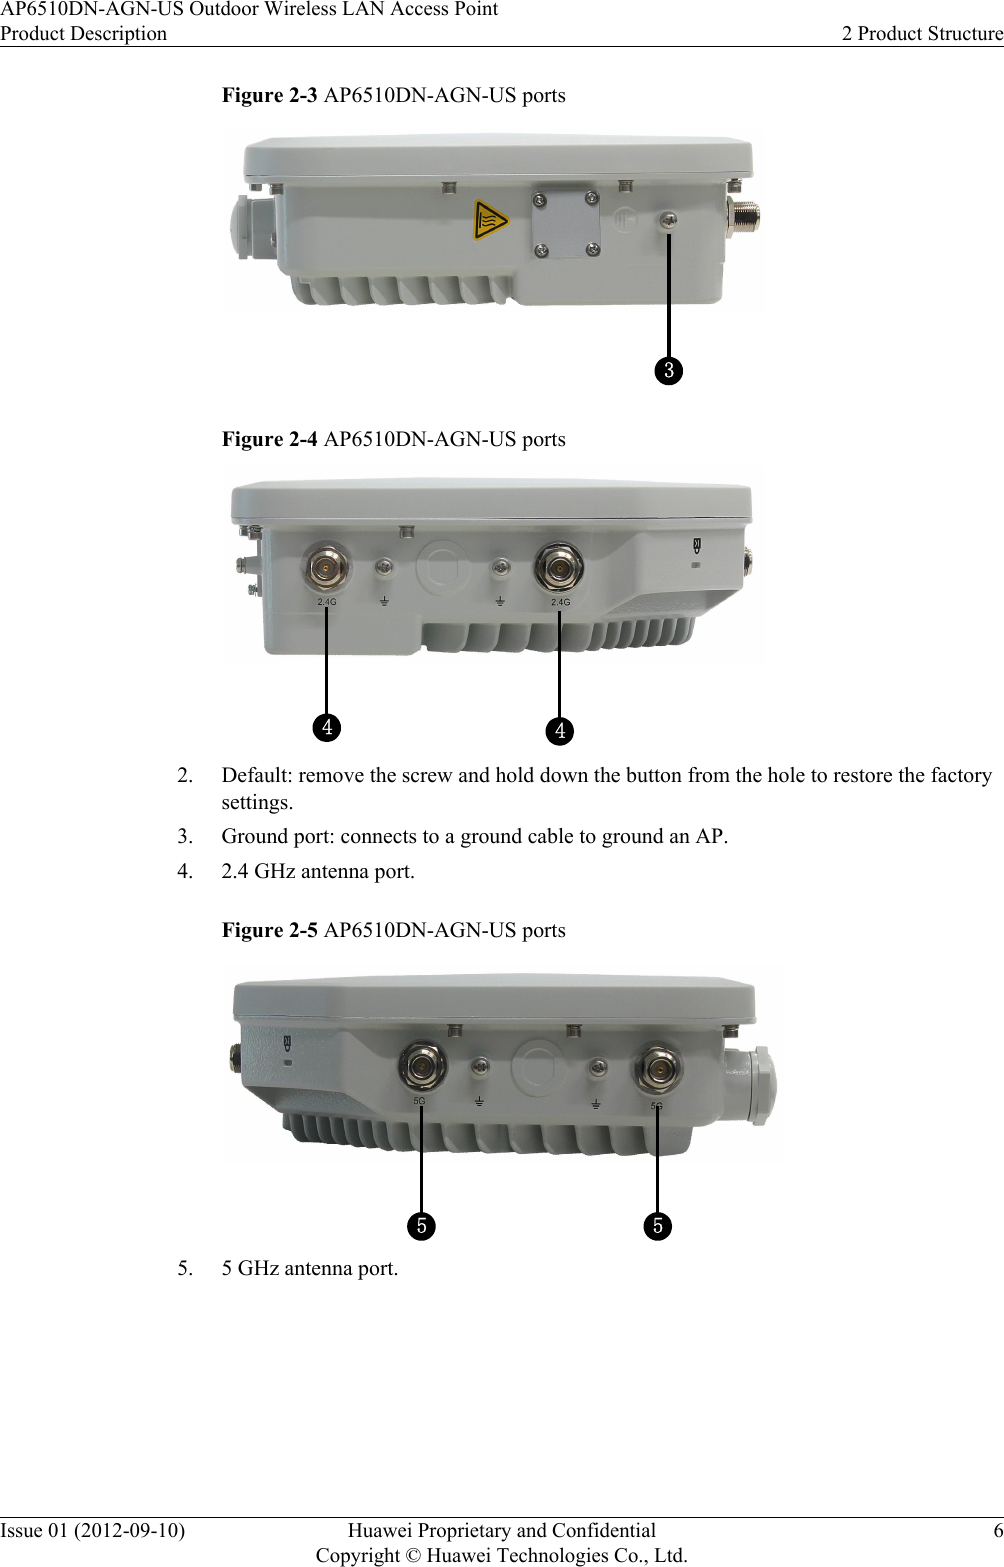 Figure 2-3 AP6510DN-AGN-US ports3Figure 2-4 AP6510DN-AGN-US ports442. Default: remove the screw and hold down the button from the hole to restore the factorysettings.3. Ground port: connects to a ground cable to ground an AP.4. 2.4 GHz antenna port.Figure 2-5 AP6510DN-AGN-US ports555. 5 GHz antenna port.AP6510DN-AGN-US Outdoor Wireless LAN Access PointProduct Description 2 Product StructureIssue 01 (2012-09-10) Huawei Proprietary and ConfidentialCopyright © Huawei Technologies Co., Ltd.6